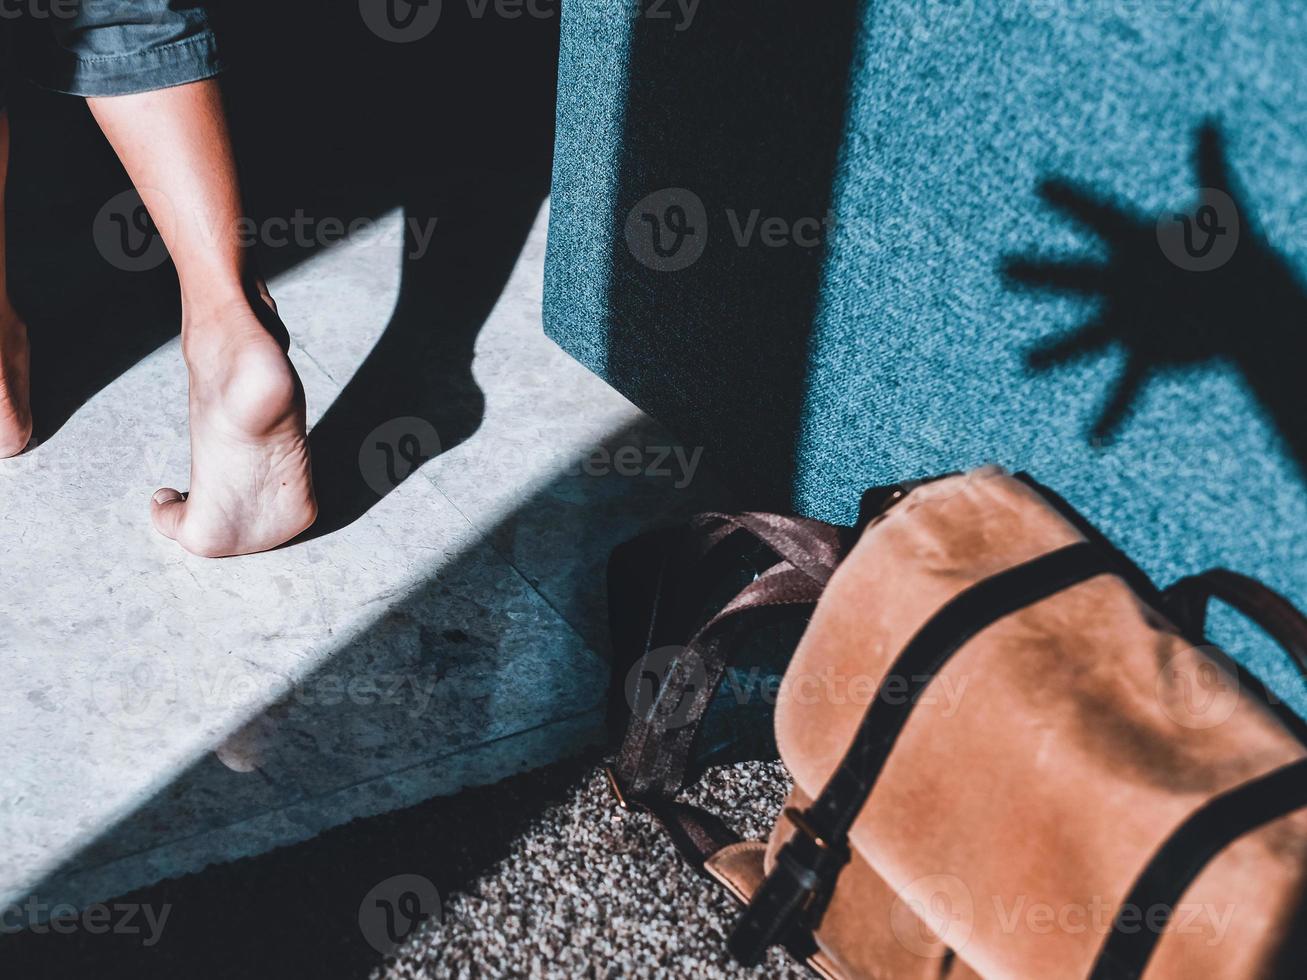 Shadow of a hand to grap the bag as soon as the owner walk away photo